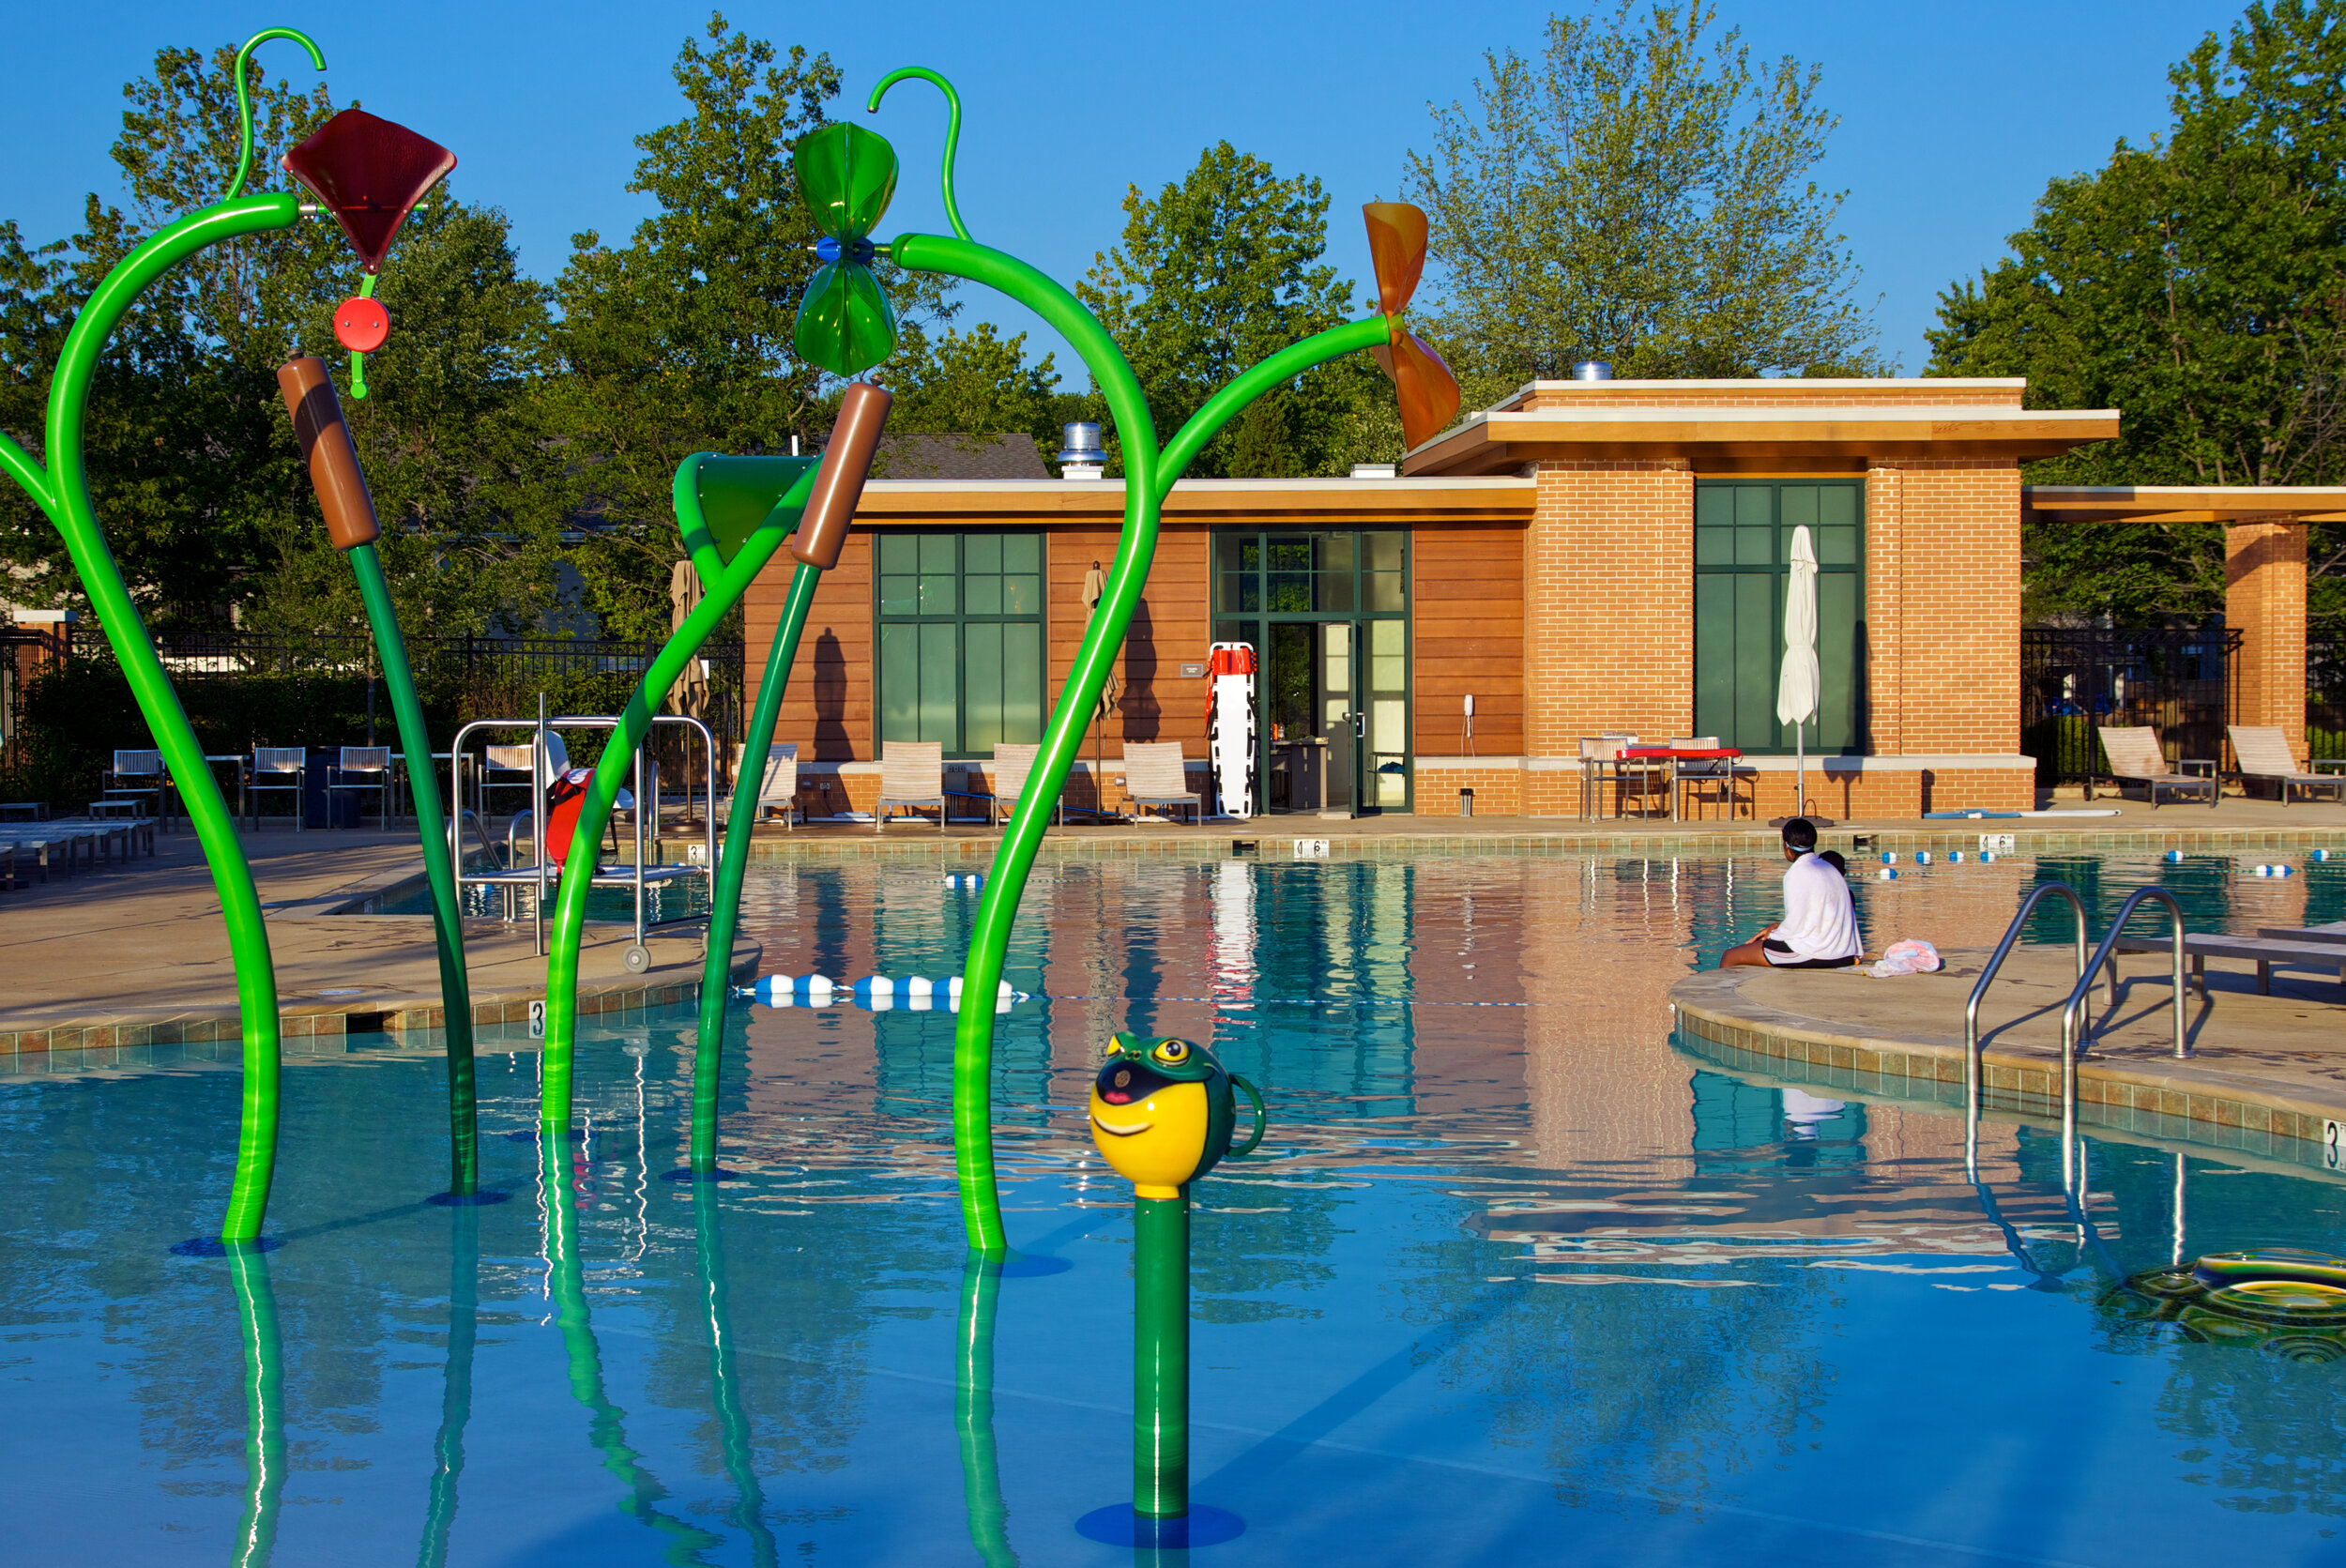 Community amenities include a resort-style pool and splash-pad.